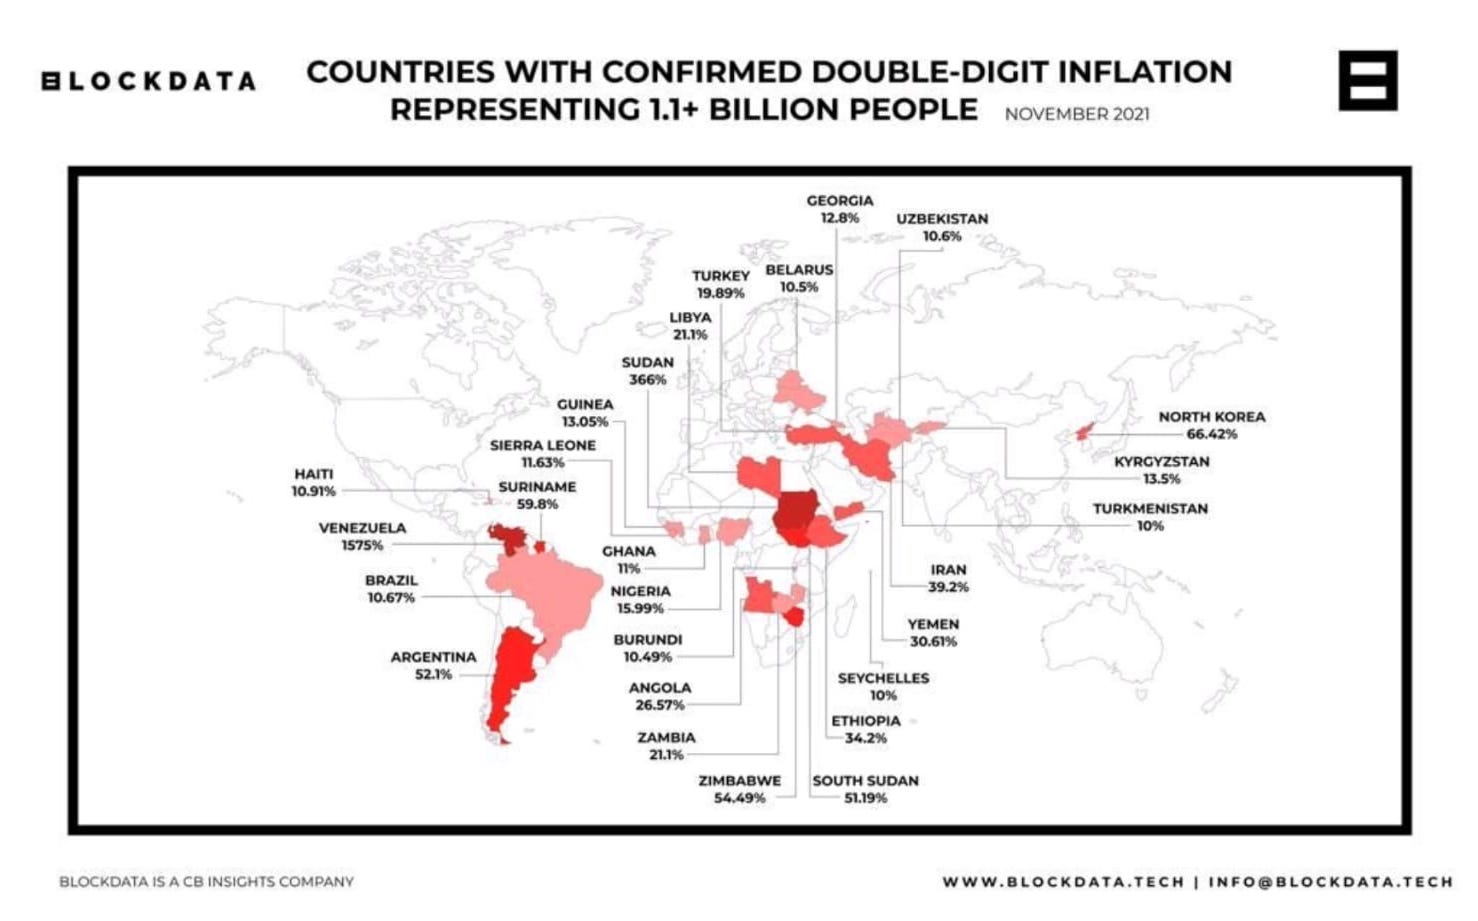 Countries with double-digit inflation in November 2021. ©Blockdata